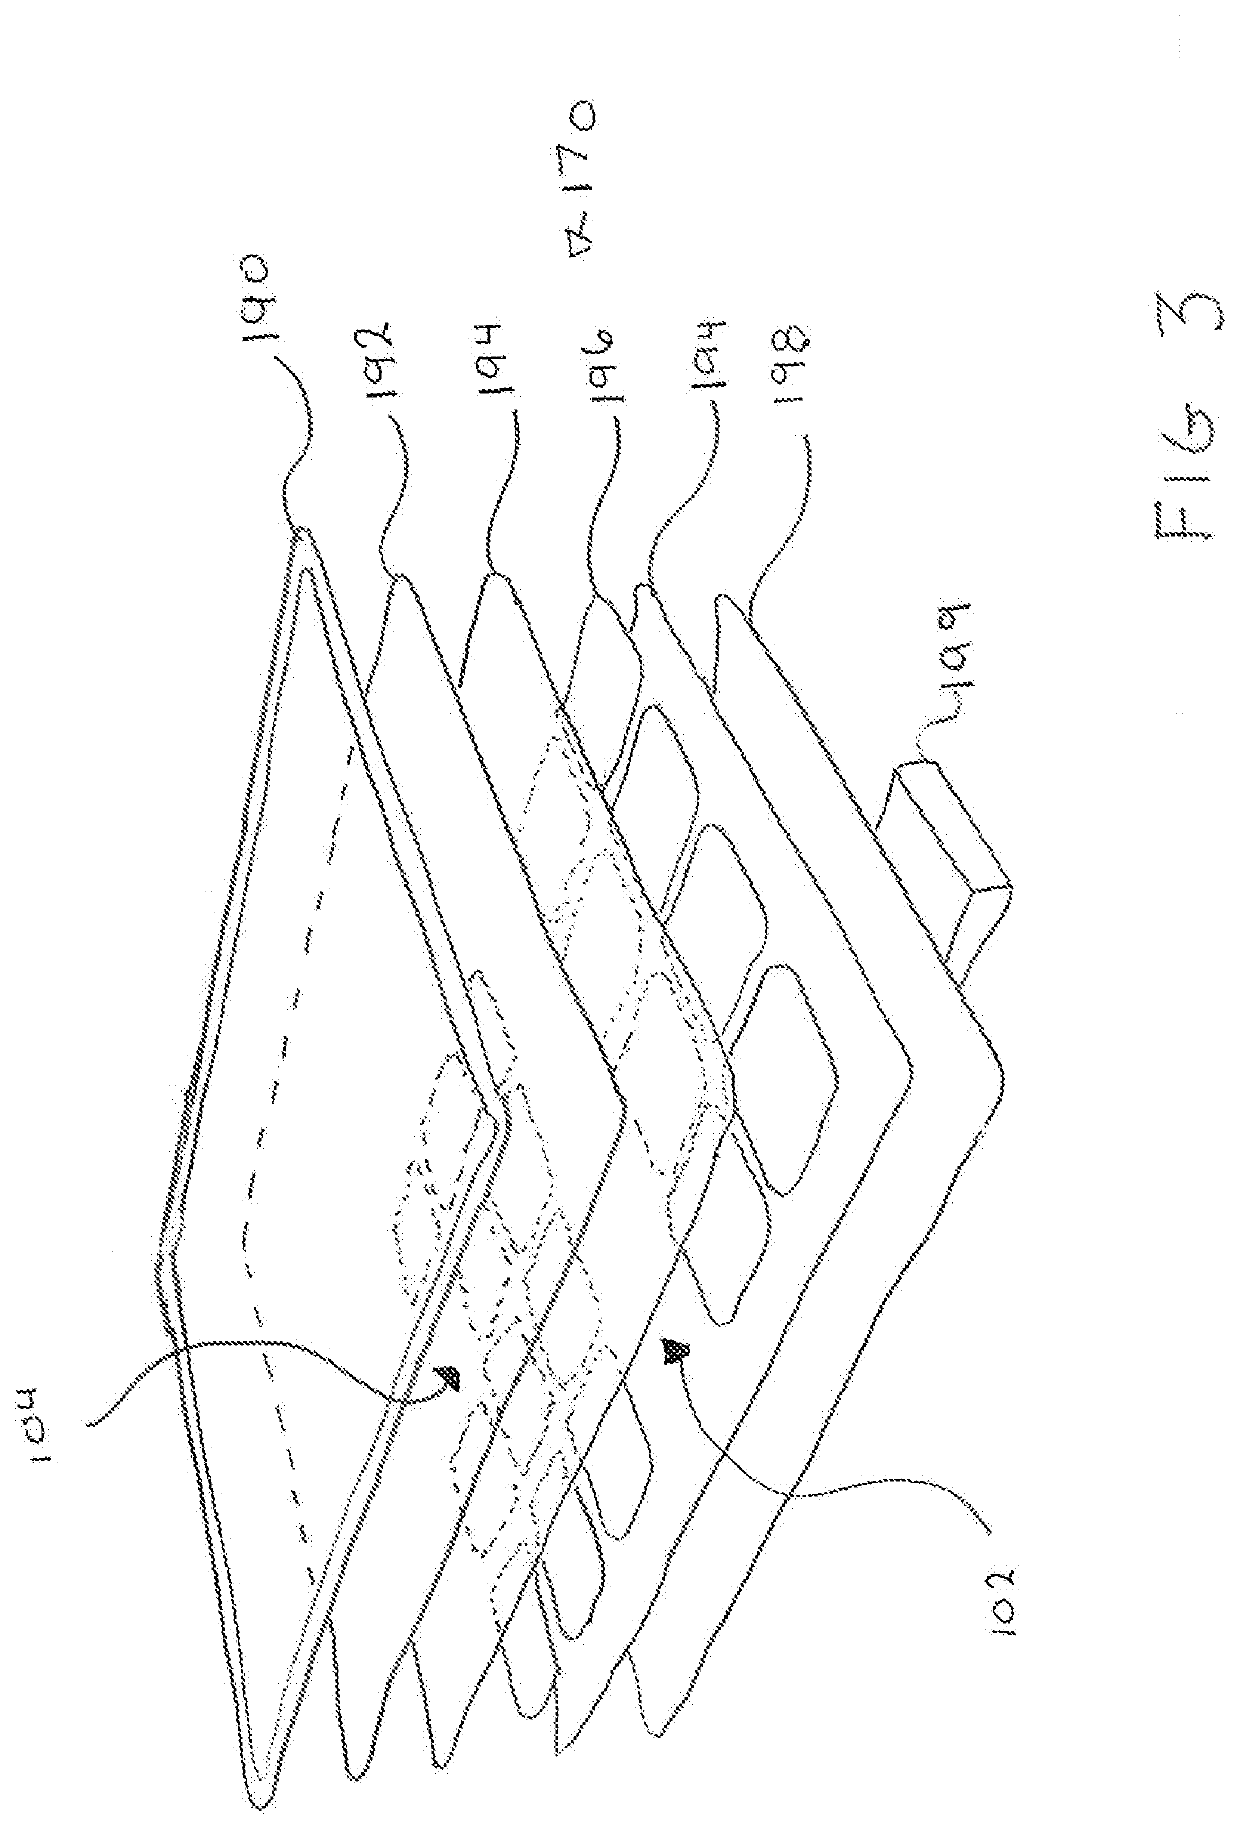 Photovoltaic Panel Array and Method of Use